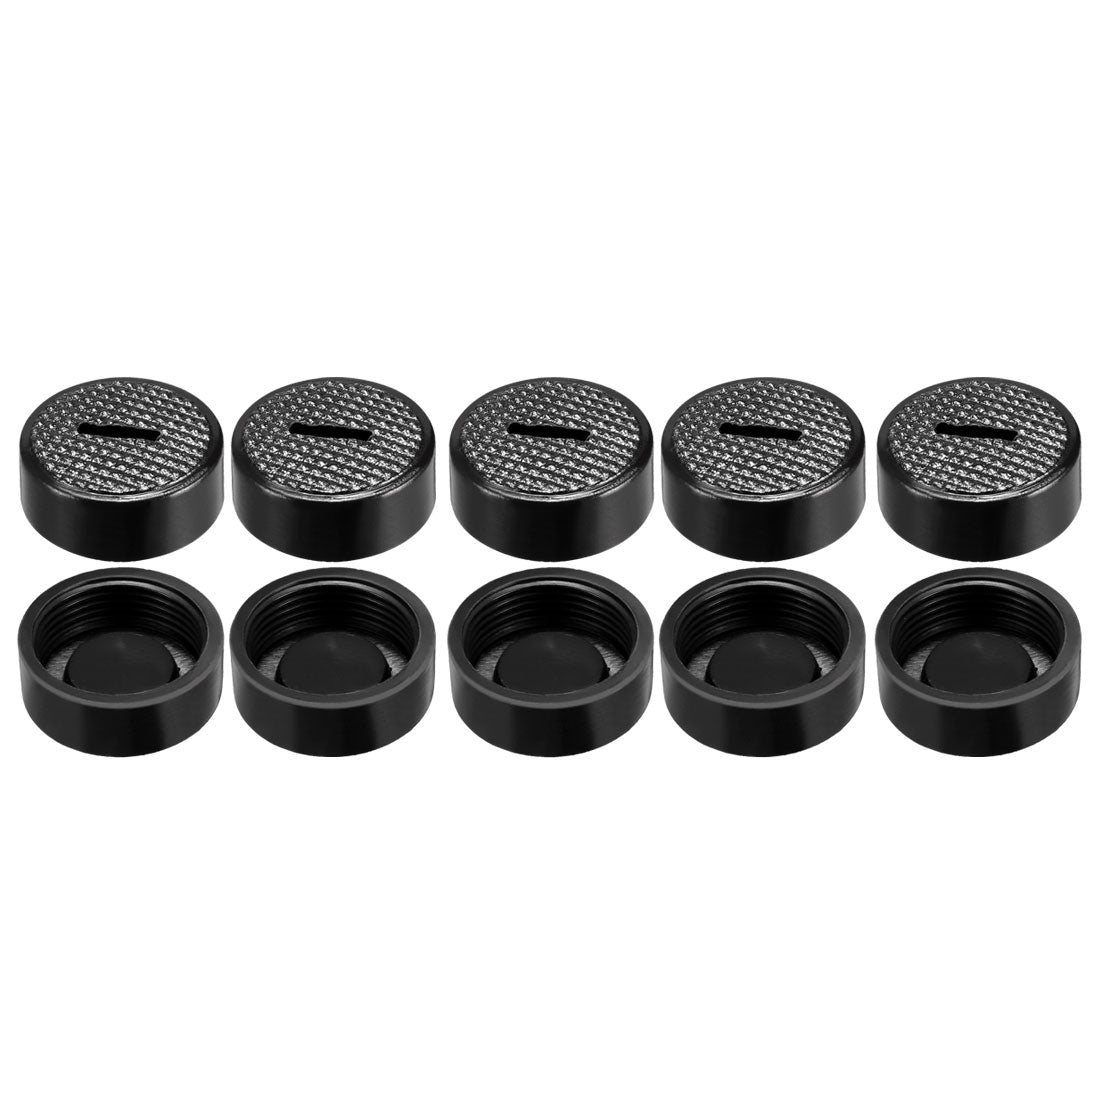 uxcell Uxcell Carbon Brush Holder Caps 19mm O.D. 15mm I.D. 7.5mm Thickness Motor Brush Cover Plastic Fitting Thread Black 10pcs